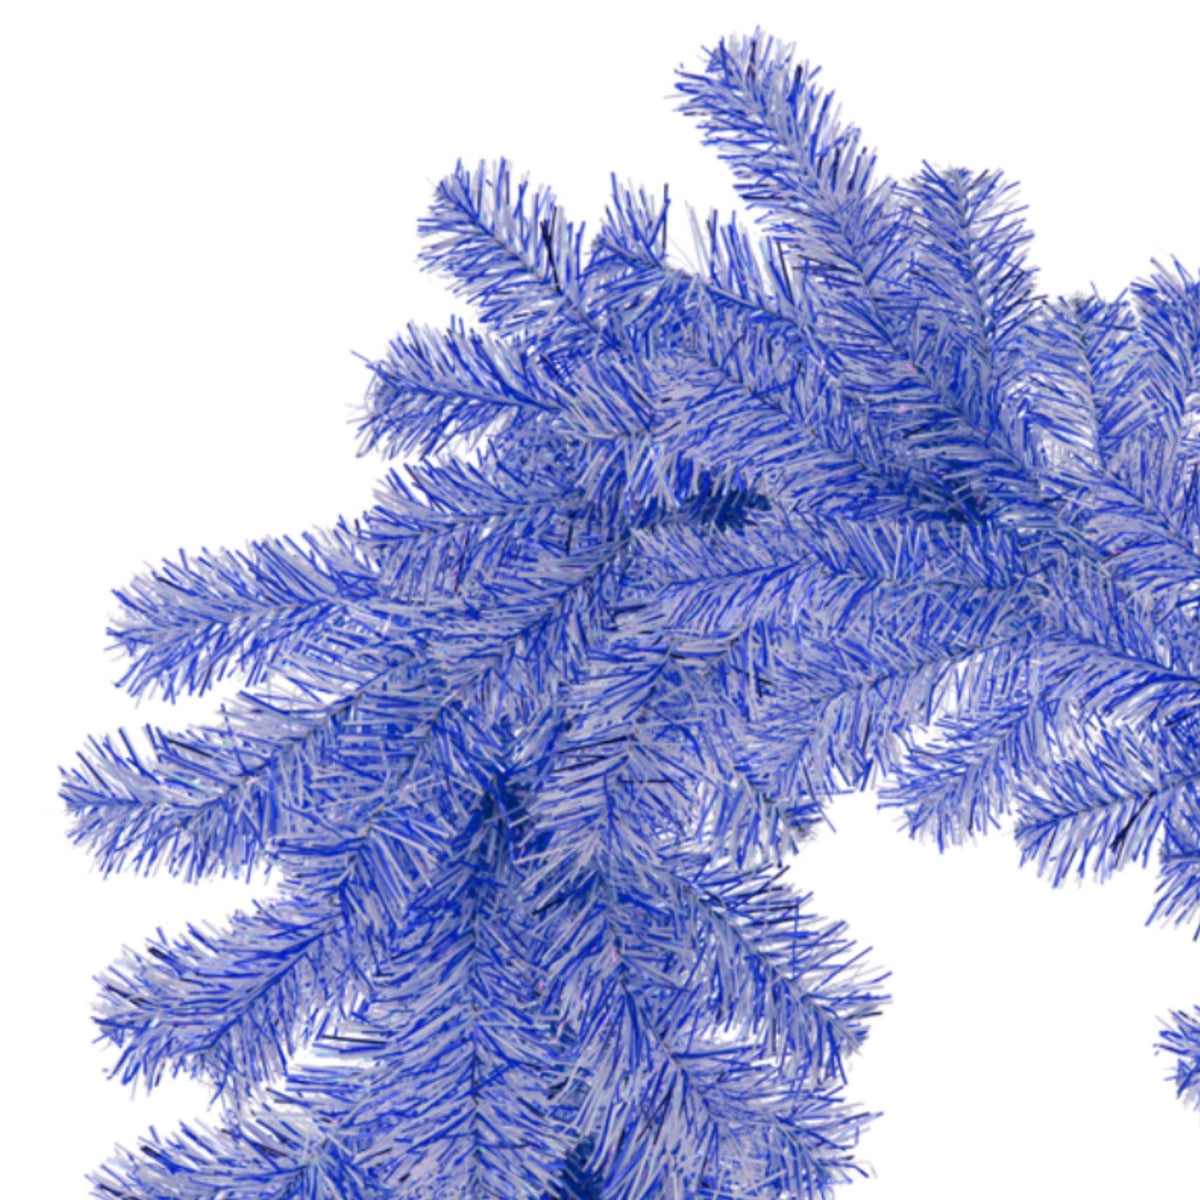 Purchase new Lee Display's 6FT Blue and White Tinsel Christmas Brush Garlands.  On sale now at leedisplay.com